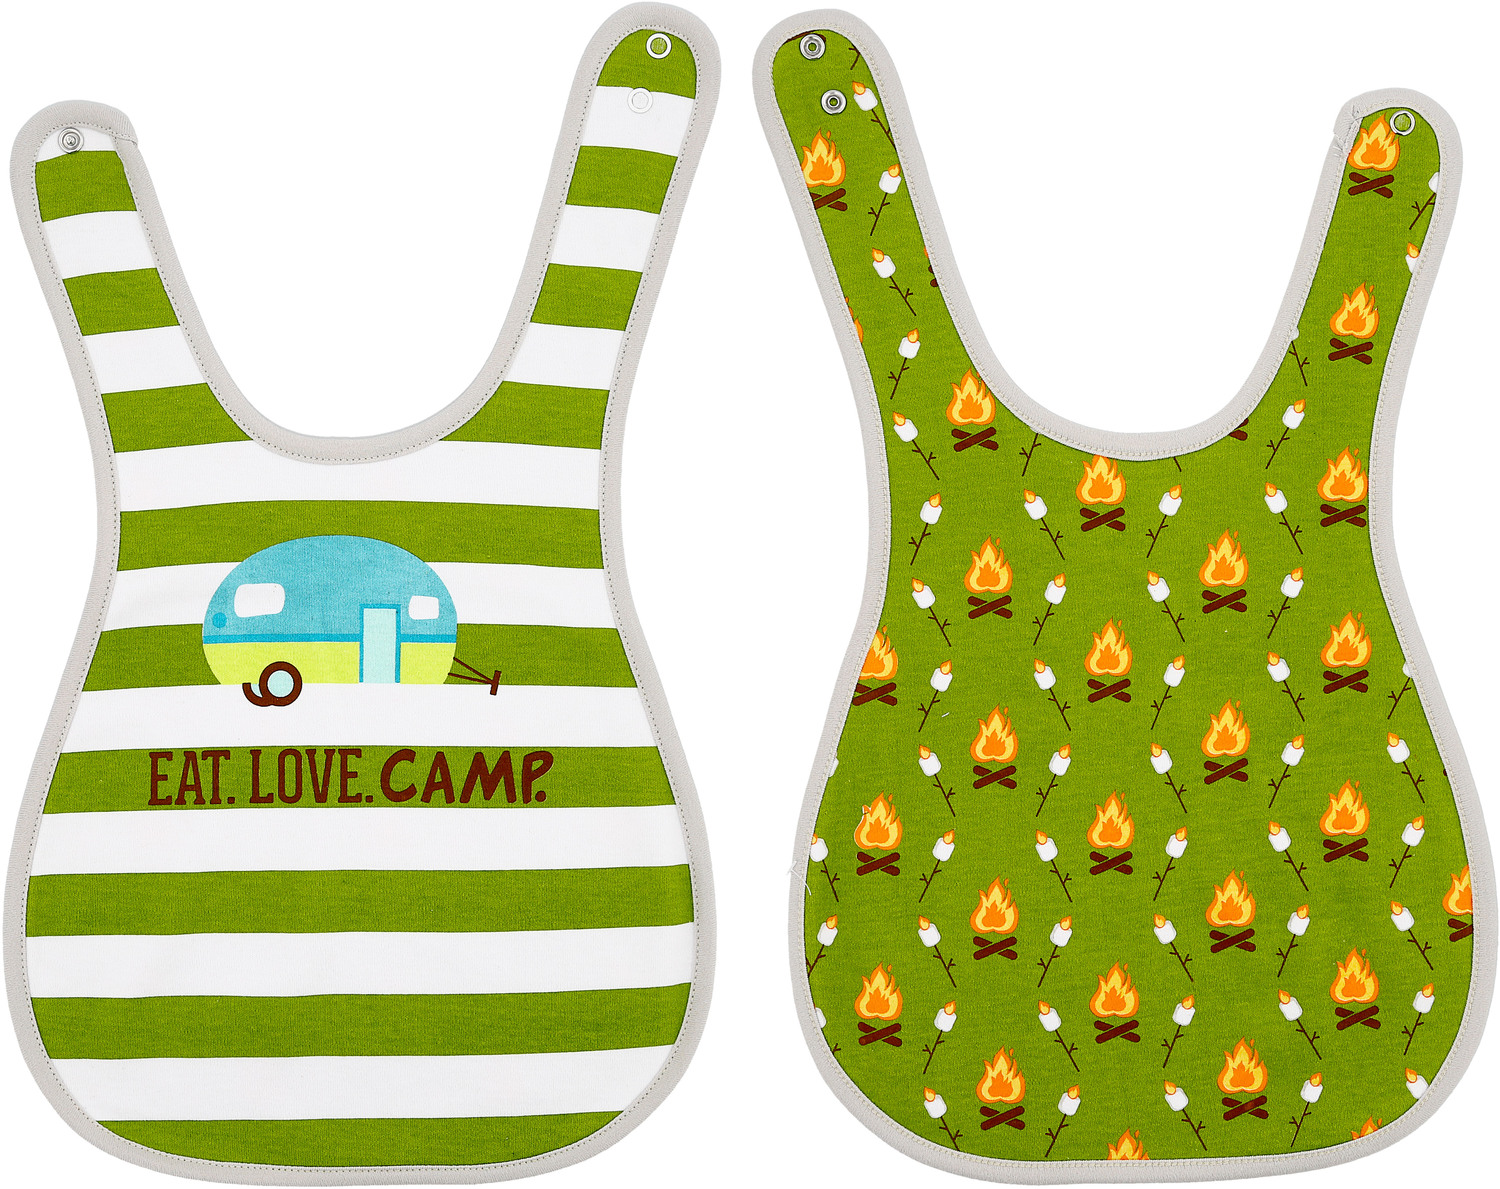 Campfire and Mallows by We Baby - Campfire and Mallows - Reversible Bib
(6M - 3 Years)